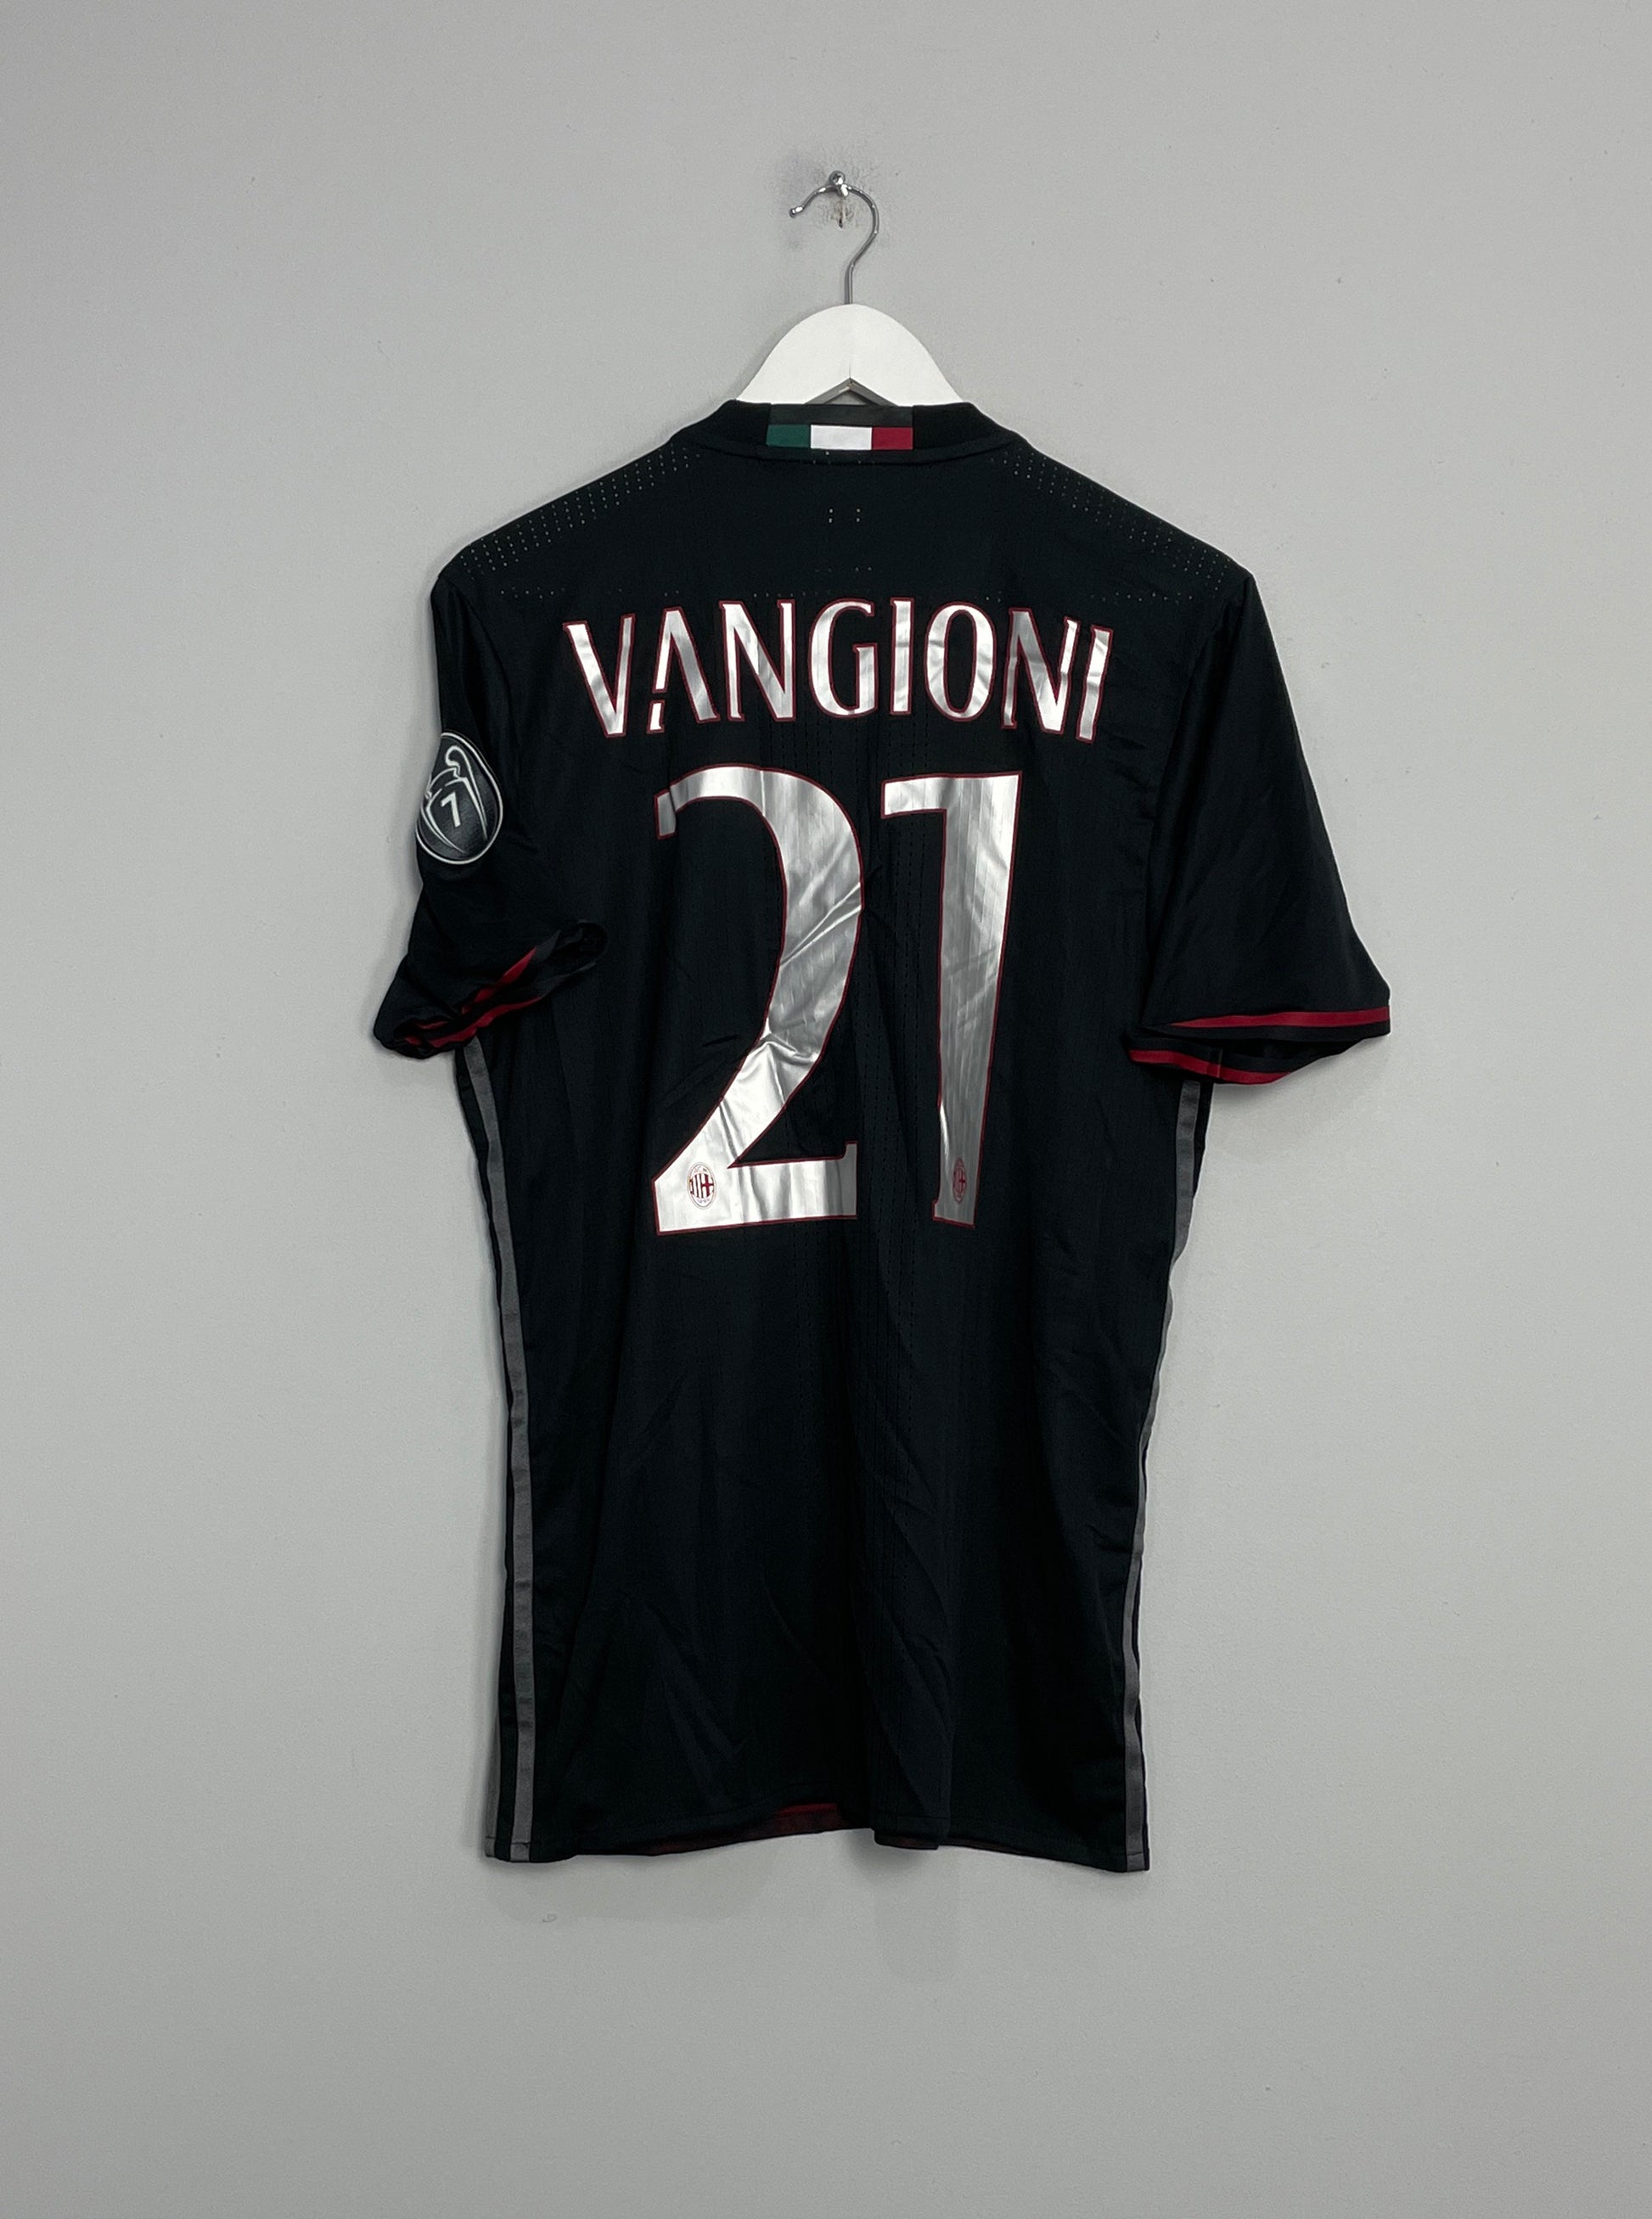 Image of the AC Milan Vangioni shirt from the 2016/17 season